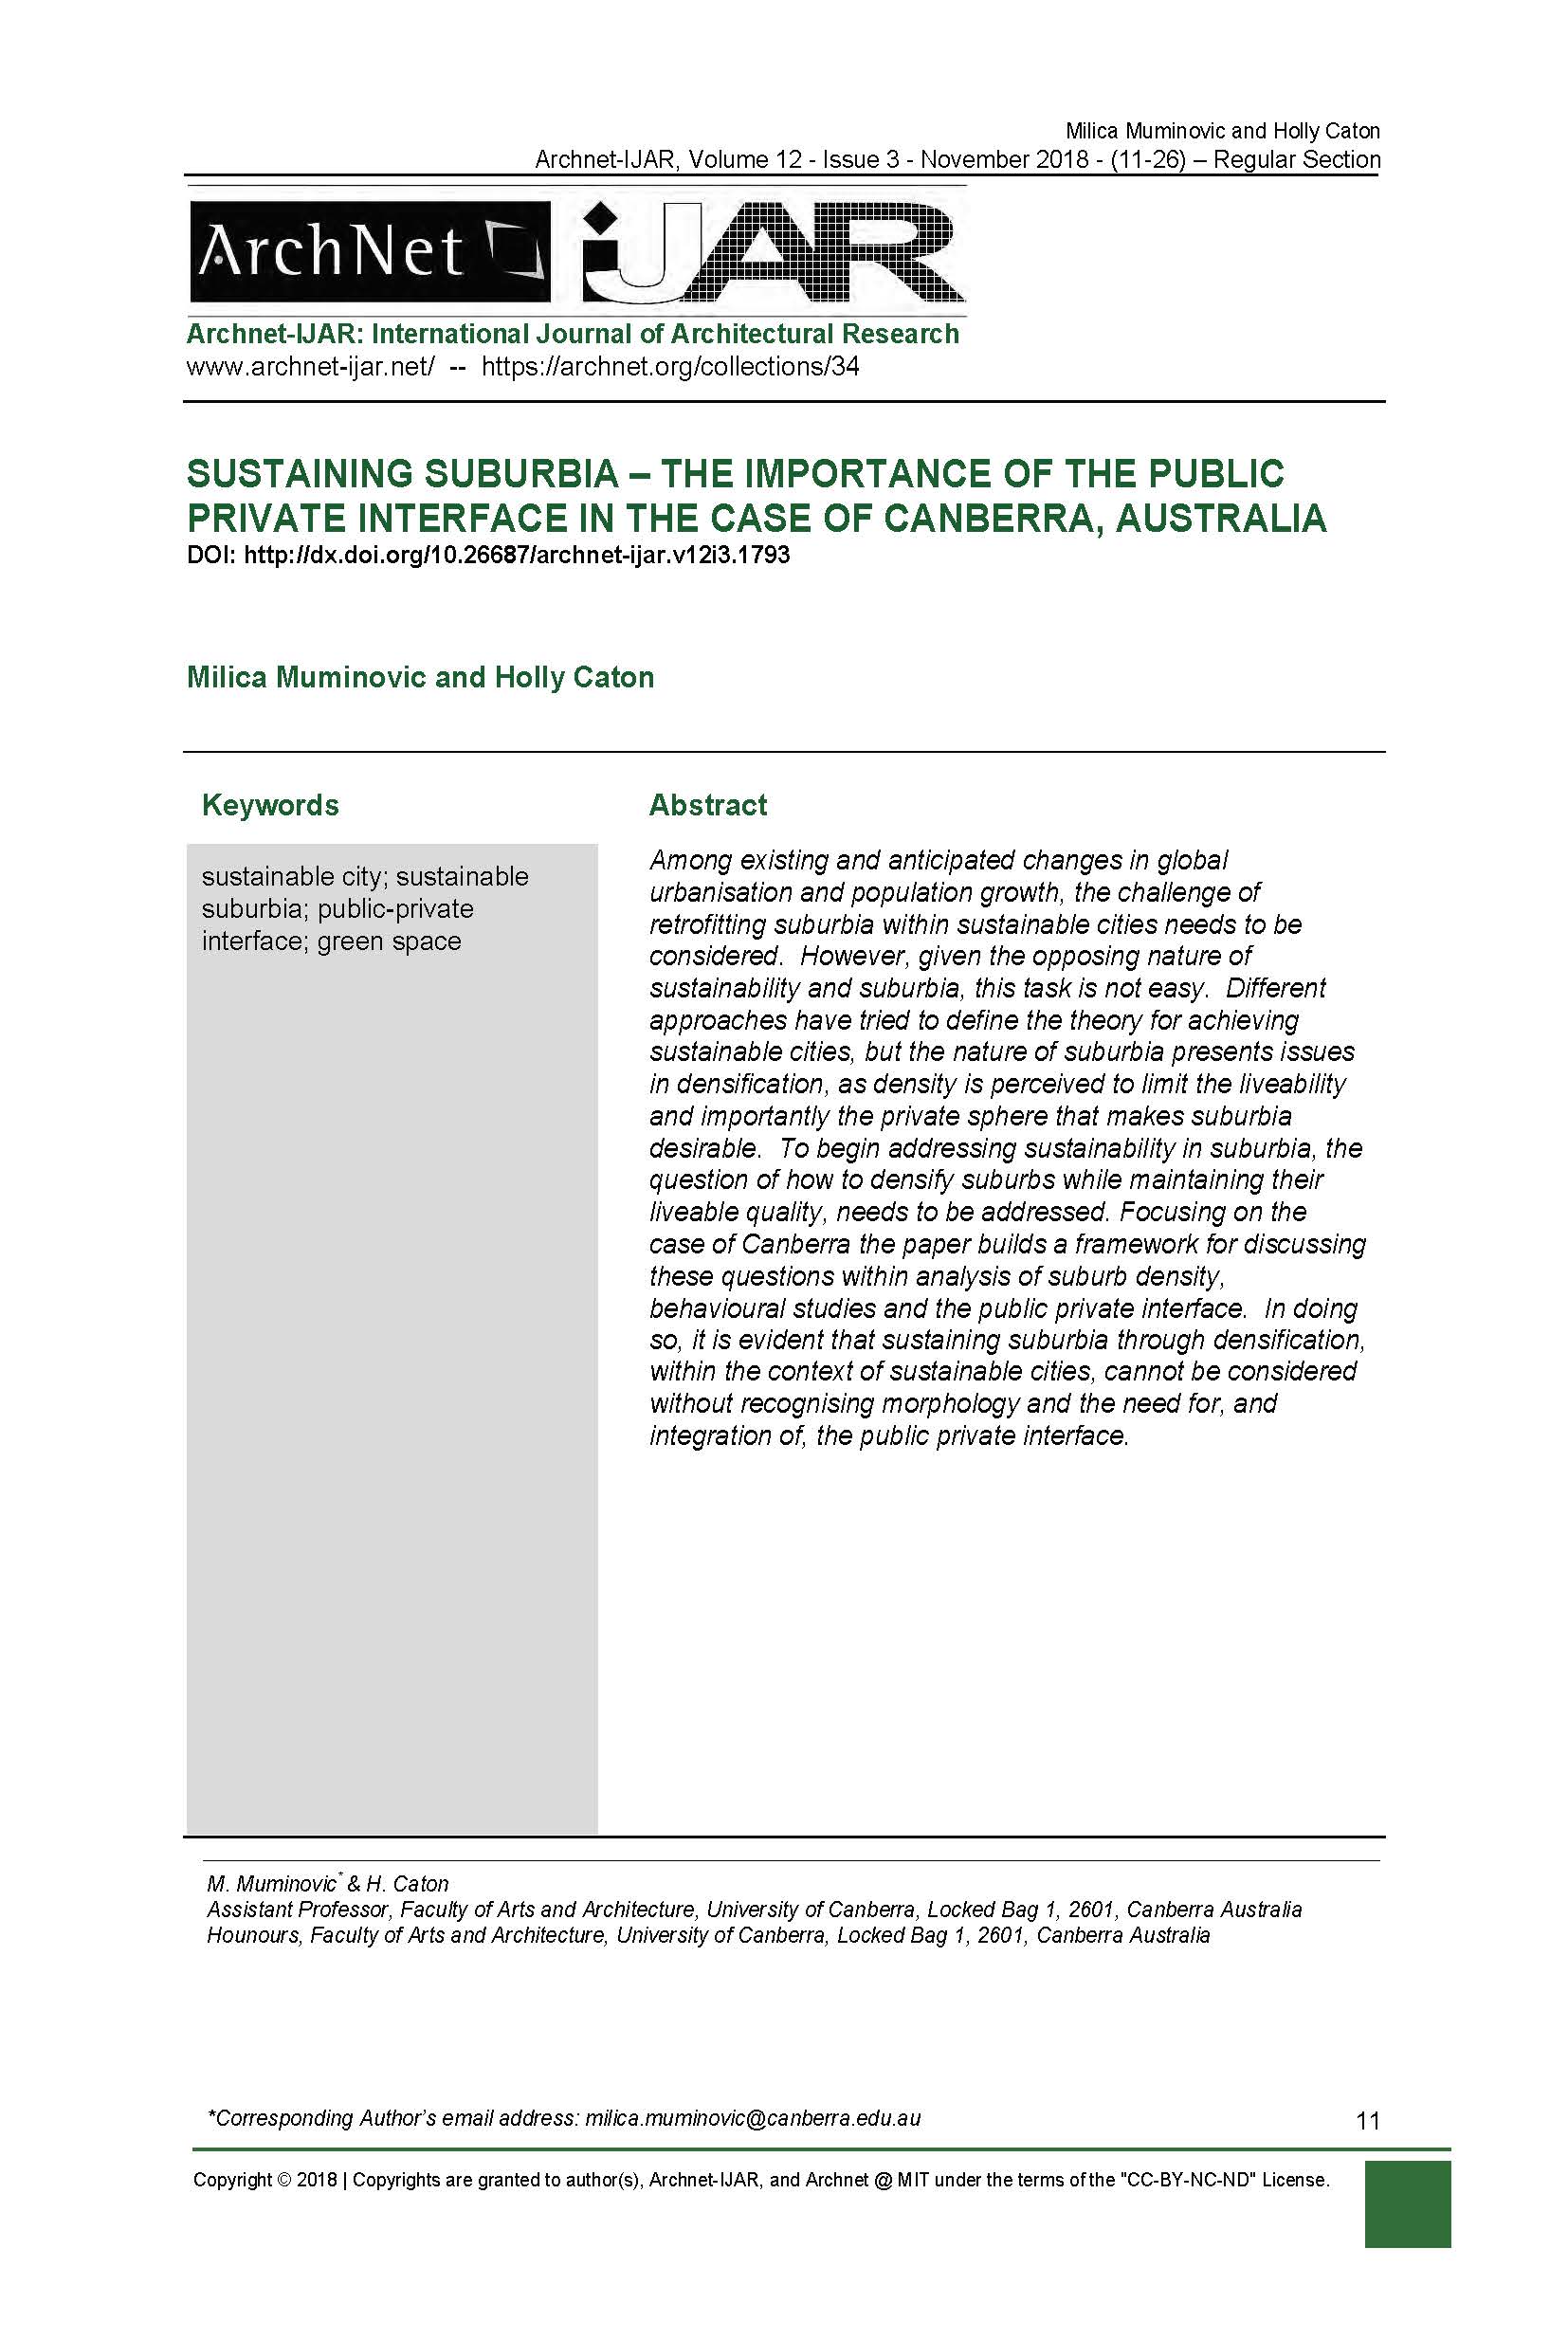 Sustaining Suburbia - The Importance of the Public Private Interface in the Case of Canberra, Australia